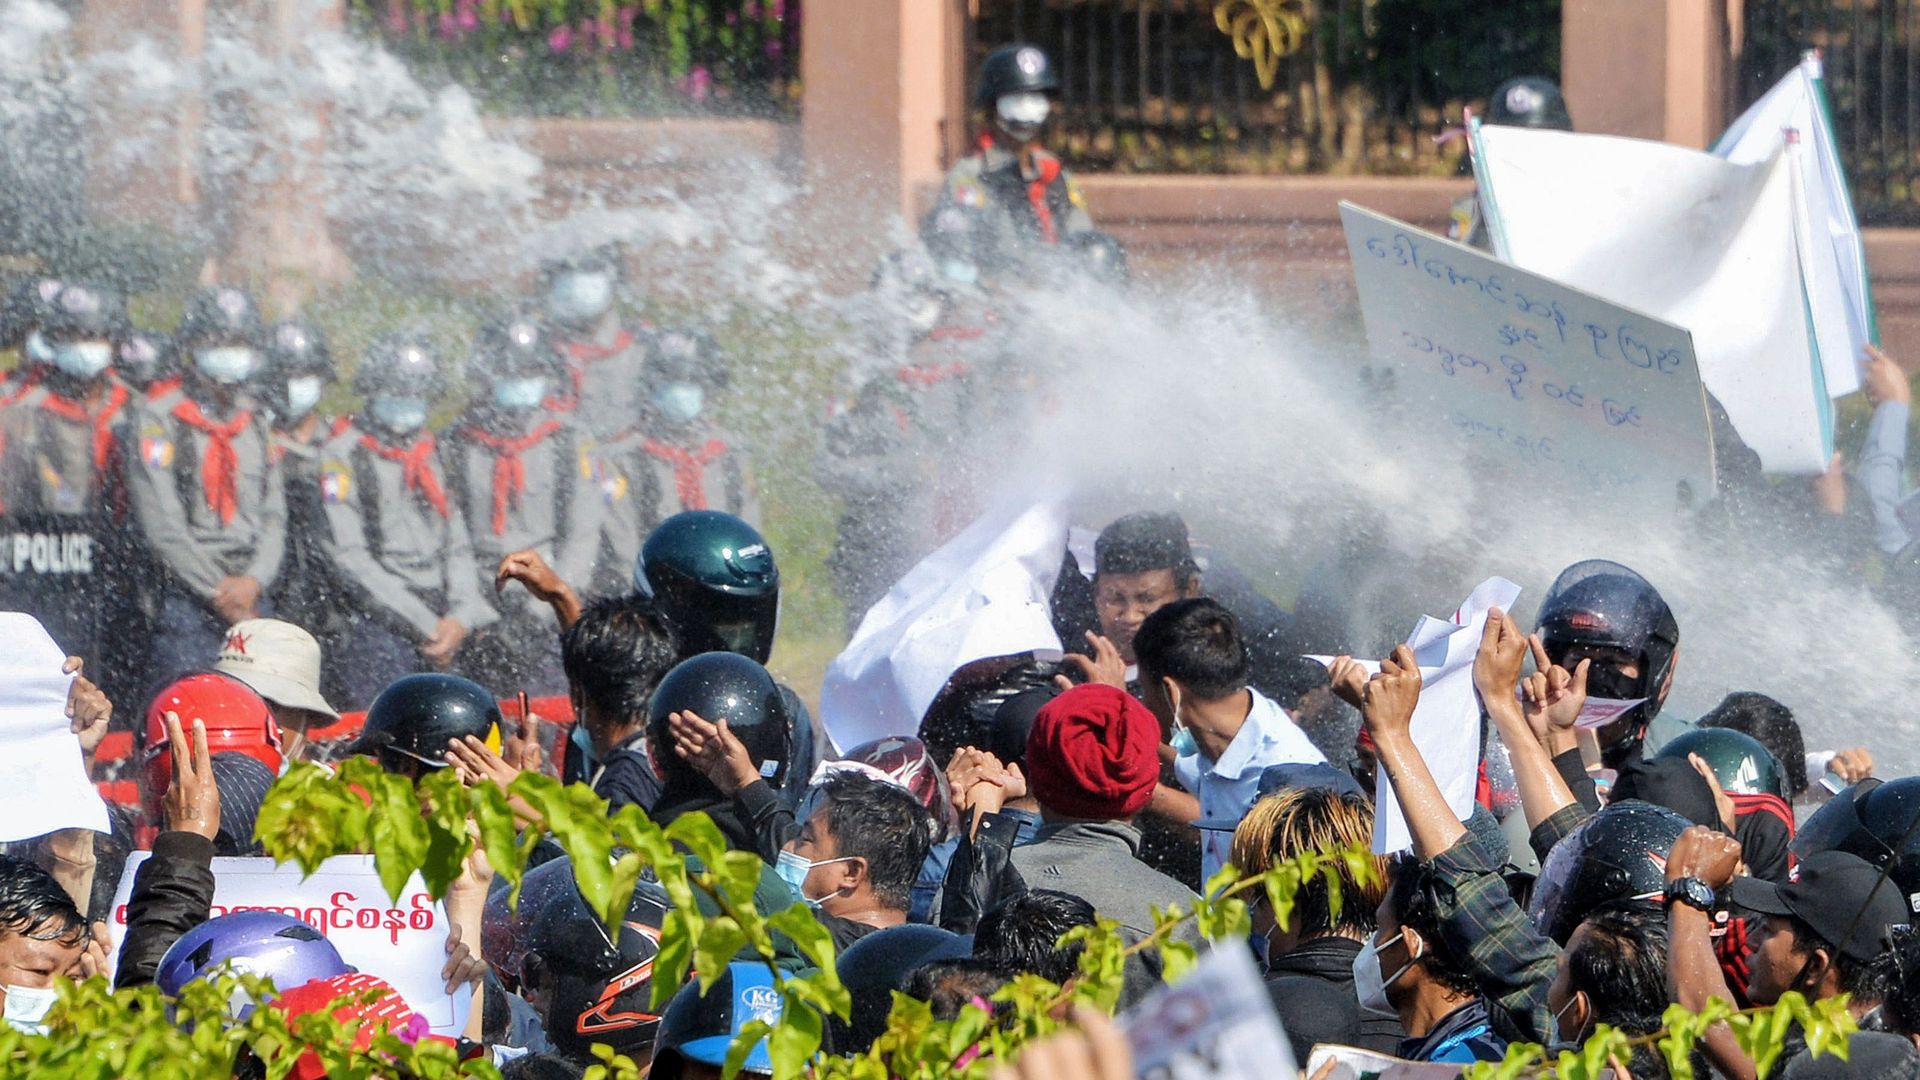  Myanmar police (in background) fire water cannon at protesters as they continue to demonstrate against the February 1 military coup in the capital Naypyidaw on February 9